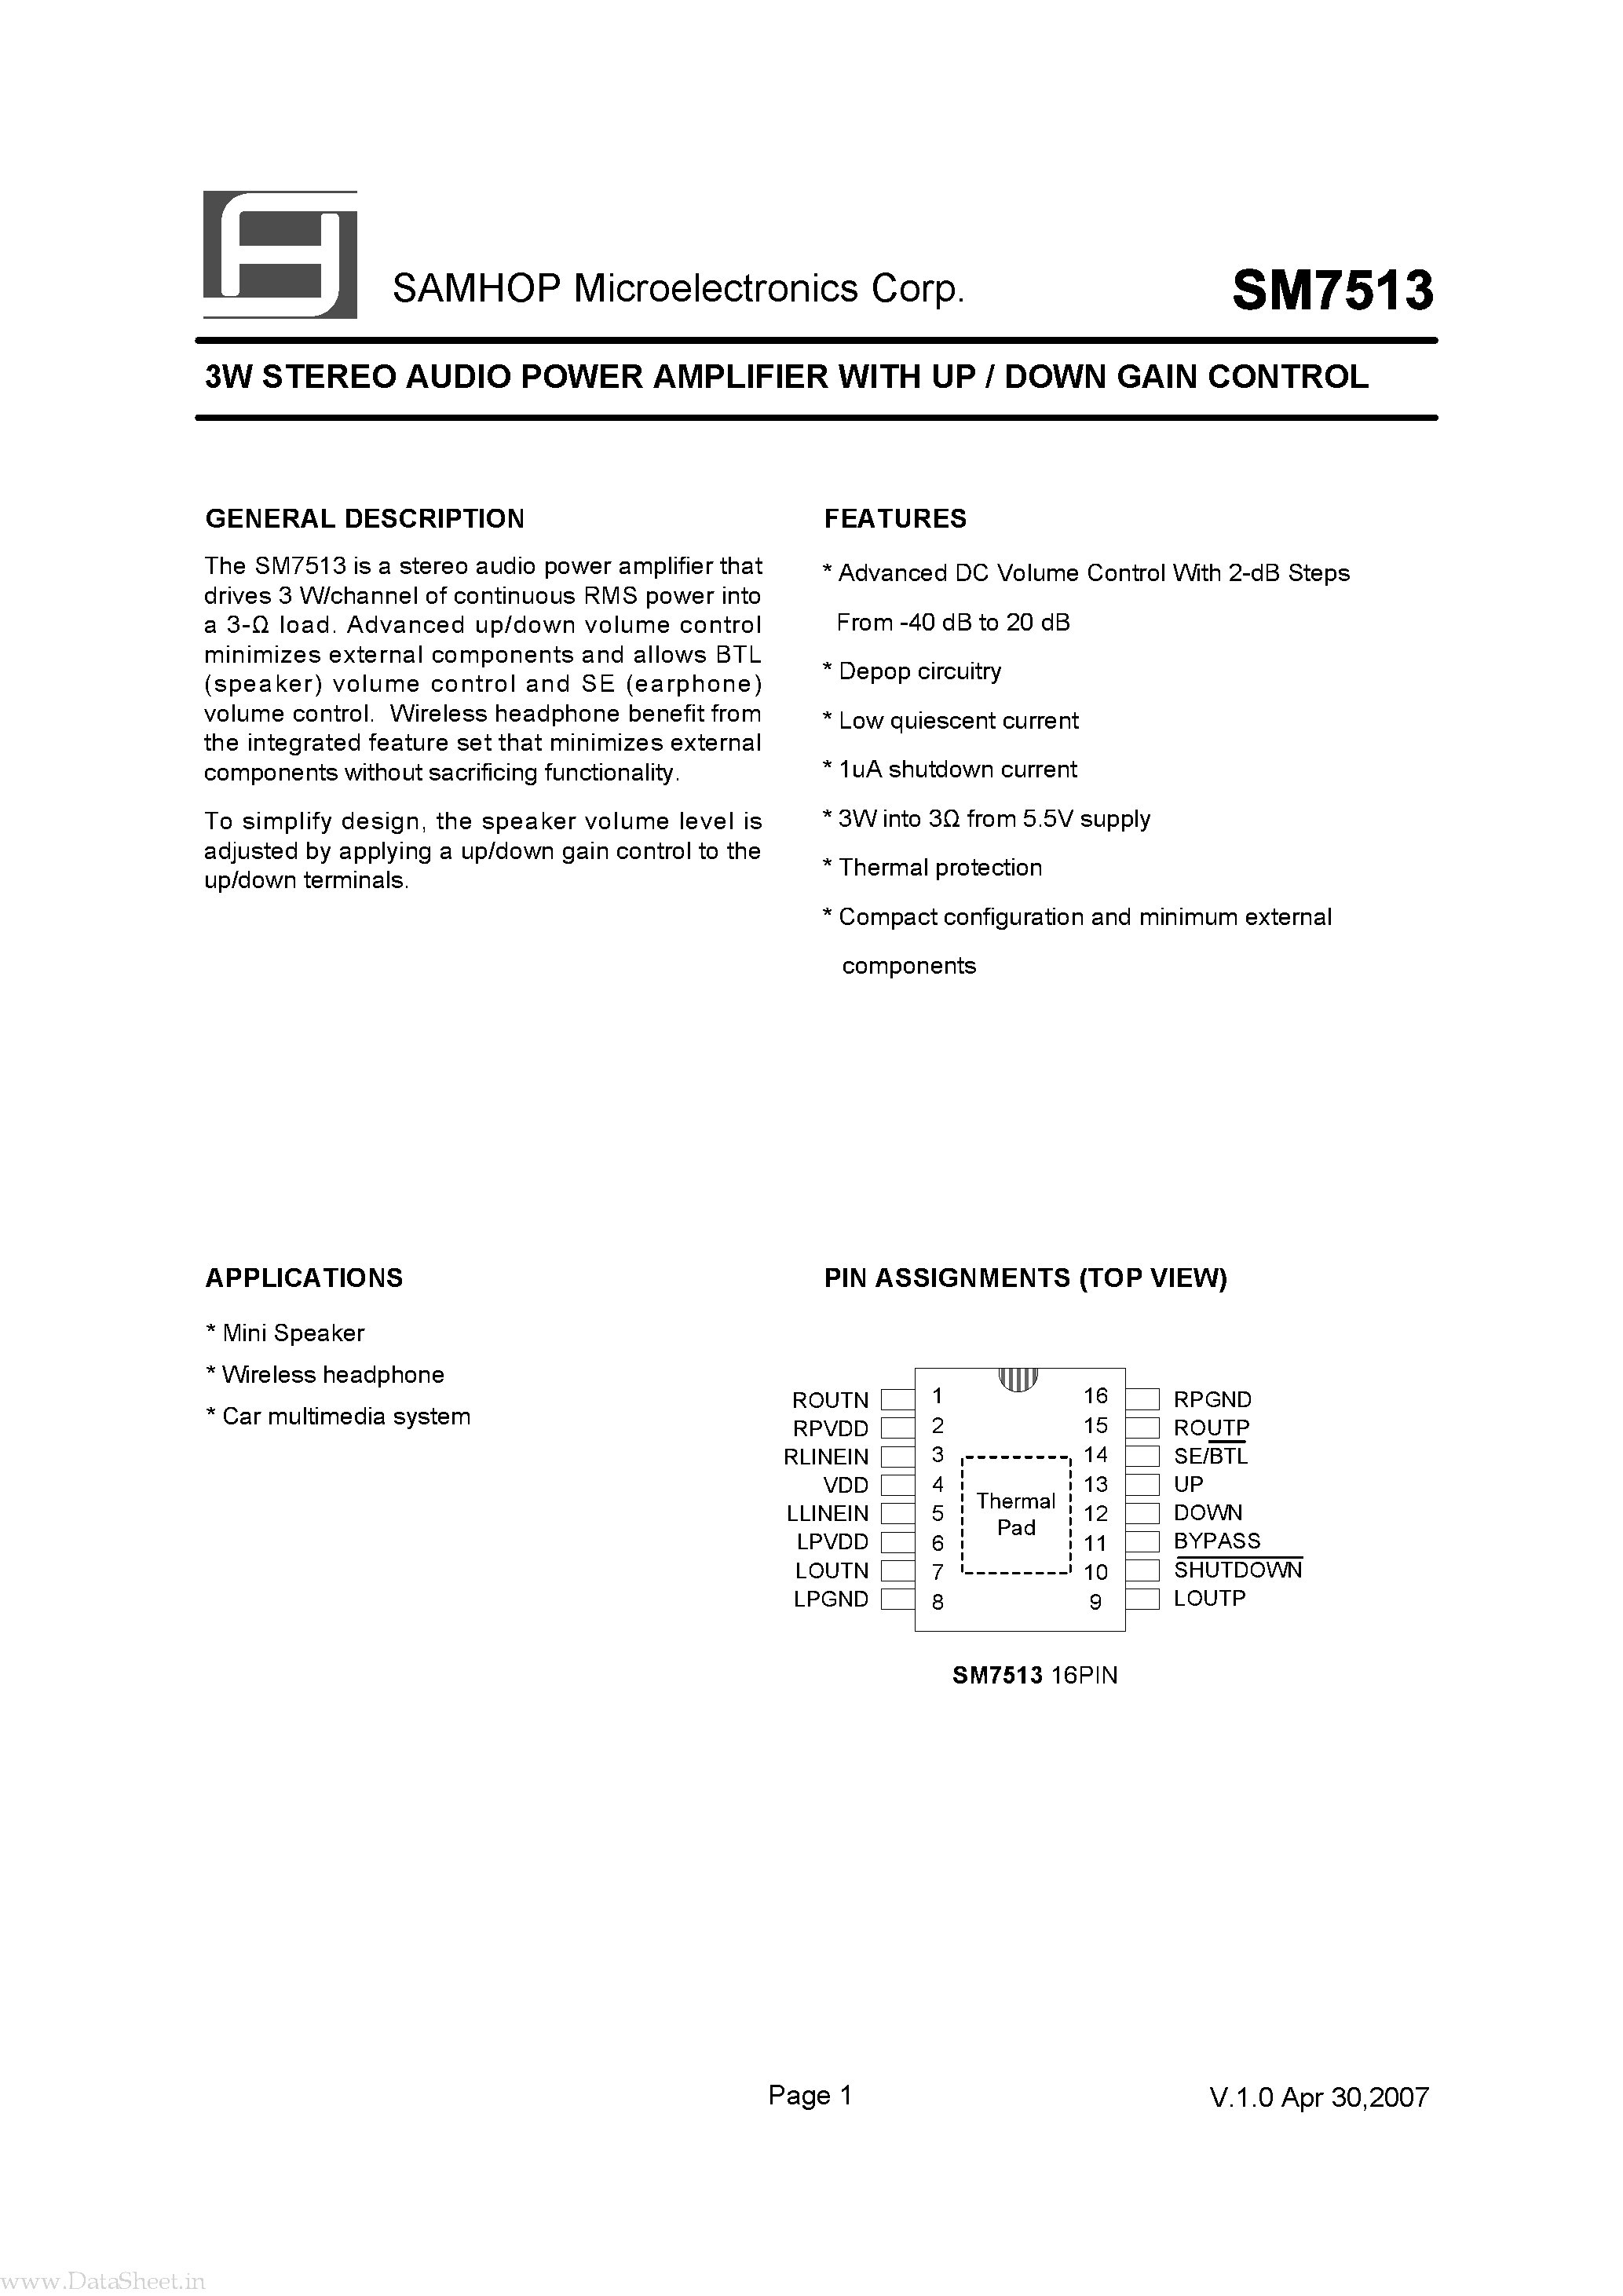 Datasheet SM7513 - 3W STEREO AUDIO POWER AMPLIFIER page 2